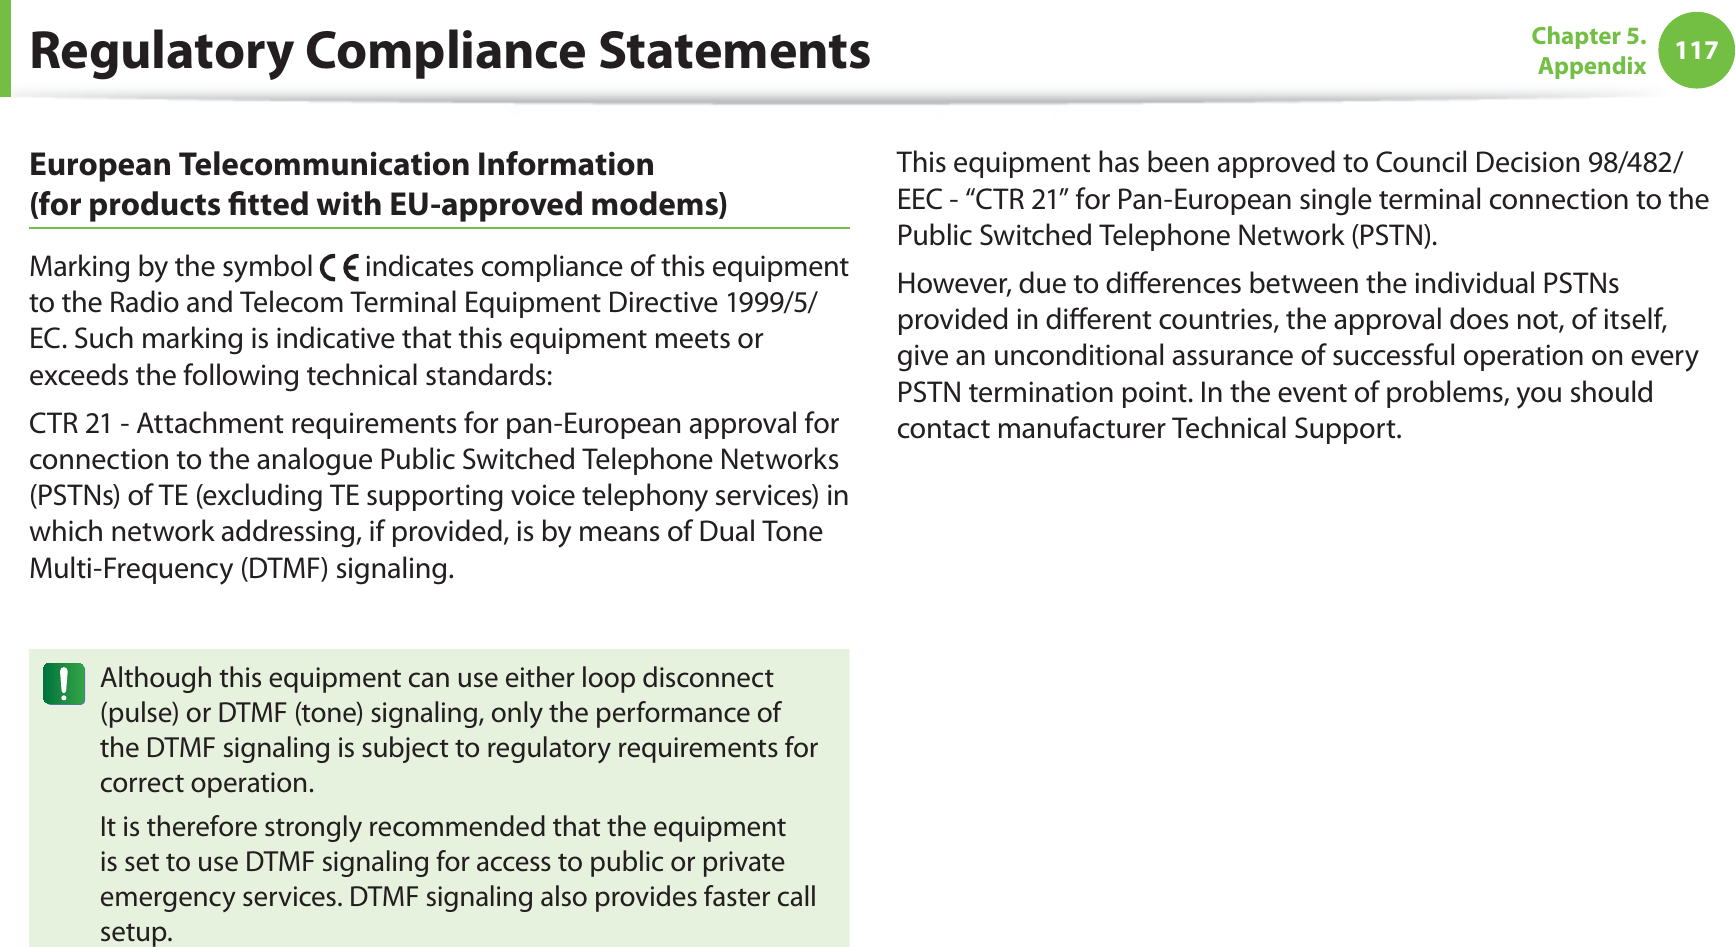 117Chapter 5.  AppendixRegulatory Compliance StatementsEuropean Telecommunication Information  (for products ﬁtted with EU-approved modems)Marking by the symbol   indicates compliance of this equipment to the Radio and Telecom Terminal Equipment Directive 1999/5/EC. Such marking is indicative that this equipment meets or exceeds the following technical standards:CTR 21 - Attachment requirements for pan-European approval for connection to the analogue Public Switched Telephone Networks (PSTNs) of TE (excluding TE supporting voice telephony services) in which network addressing, if provided, is by means of Dual Tone Multi-Frequency (DTMF) signaling.Although this equipment can use either loop disconnect (pulse) or DTMF (tone) signaling, only the performance of the DTMF signaling is subject to regulatory requirements for correct operation.It is therefore strongly recommended that the equipment is set to use DTMF signaling for access to public or private emergency services. DTMF signaling also provides faster call setup.This equipment has been approved to Council Decision 98/482/EEC - “CTR 21” for Pan-European single terminal connection to the Public Switched Telephone Network (PSTN).However, due to diﬀerences between the individual PSTNs provided in diﬀerent countries, the approval does not, of itself, give an unconditional assurance of successful operation on every PSTN termination point. In the event of problems, you should contact manufacturer Technical Support.